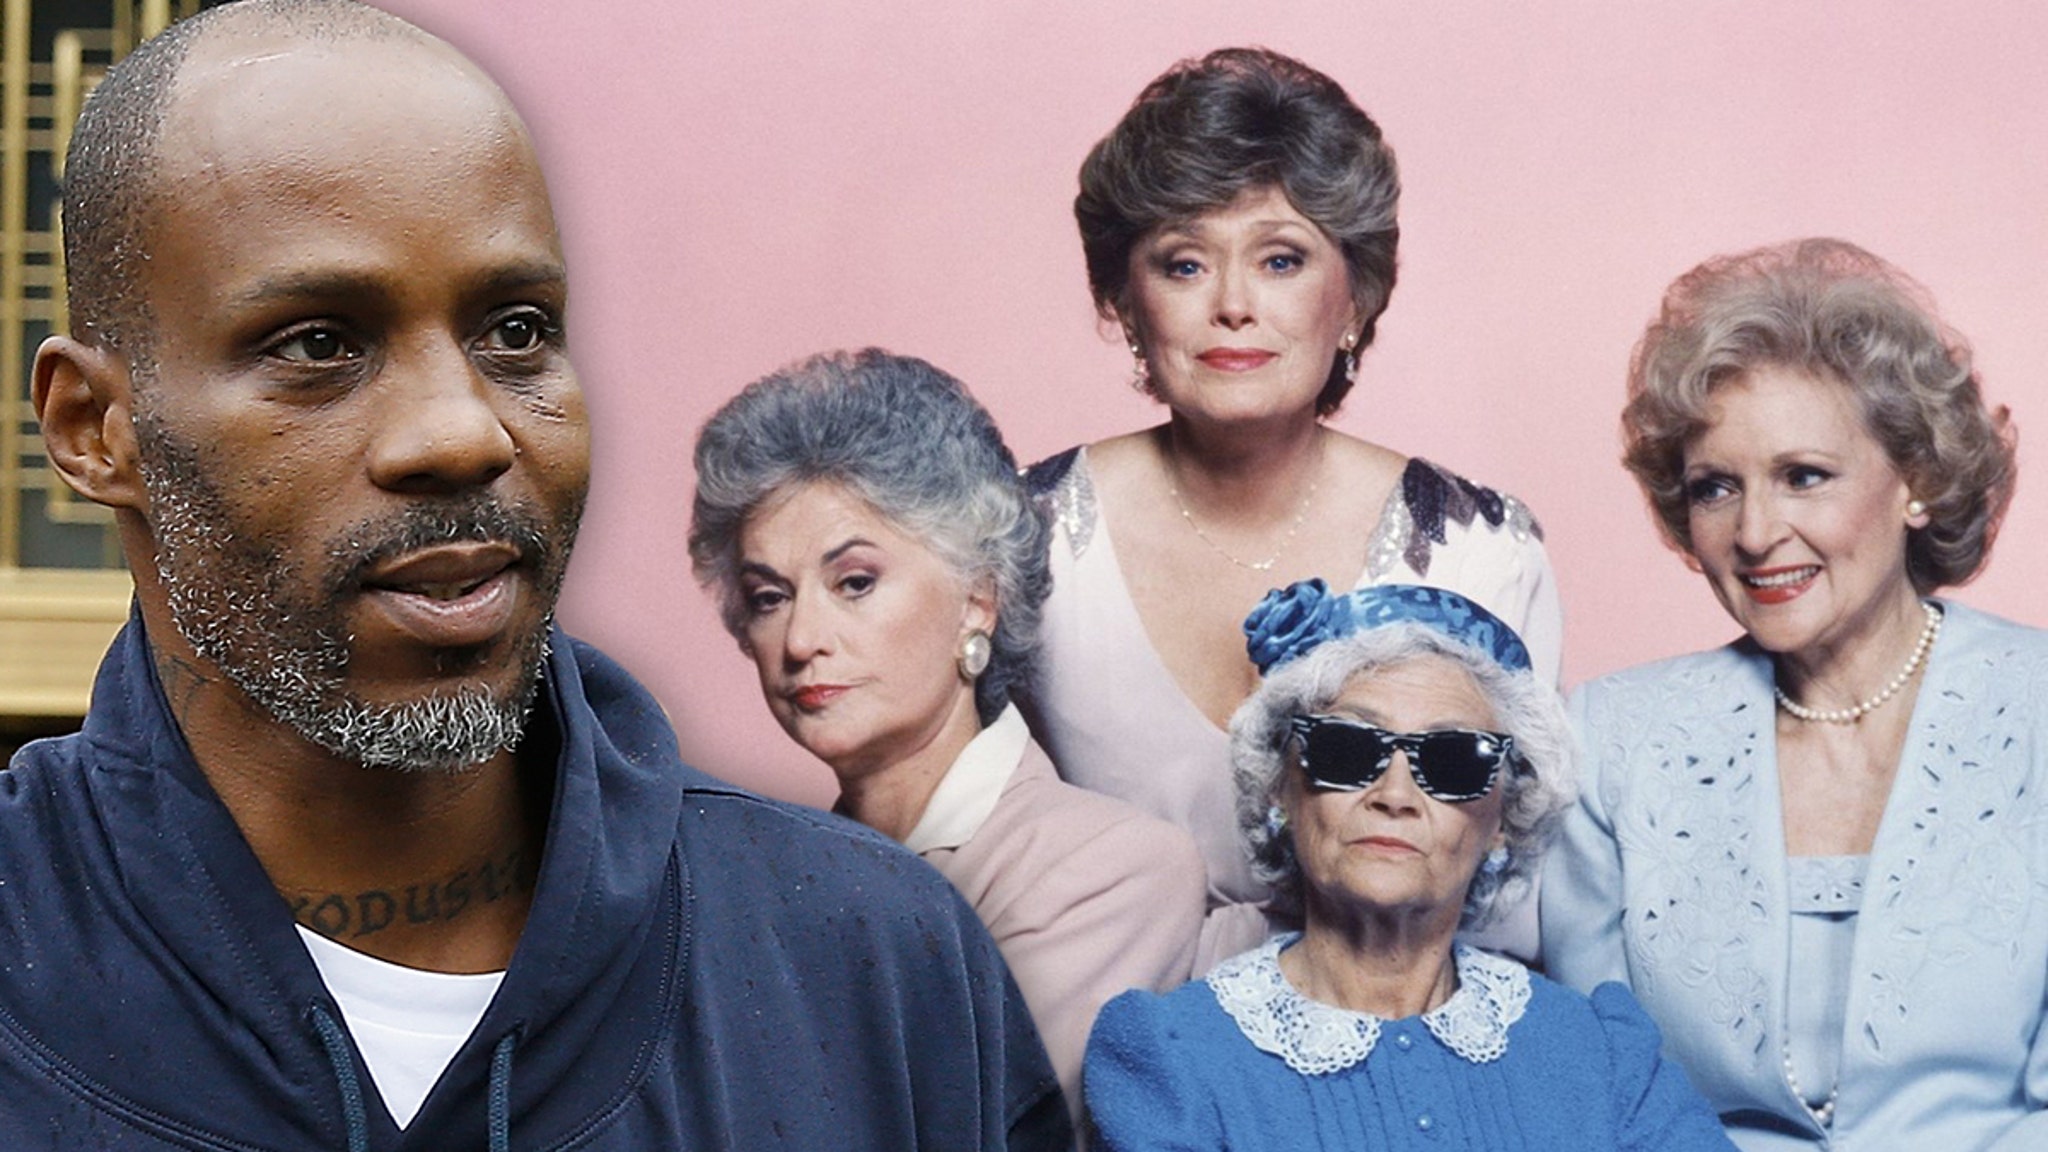 According to Gabrielle Union, DMX liked to watch ‘The Golden Girls’